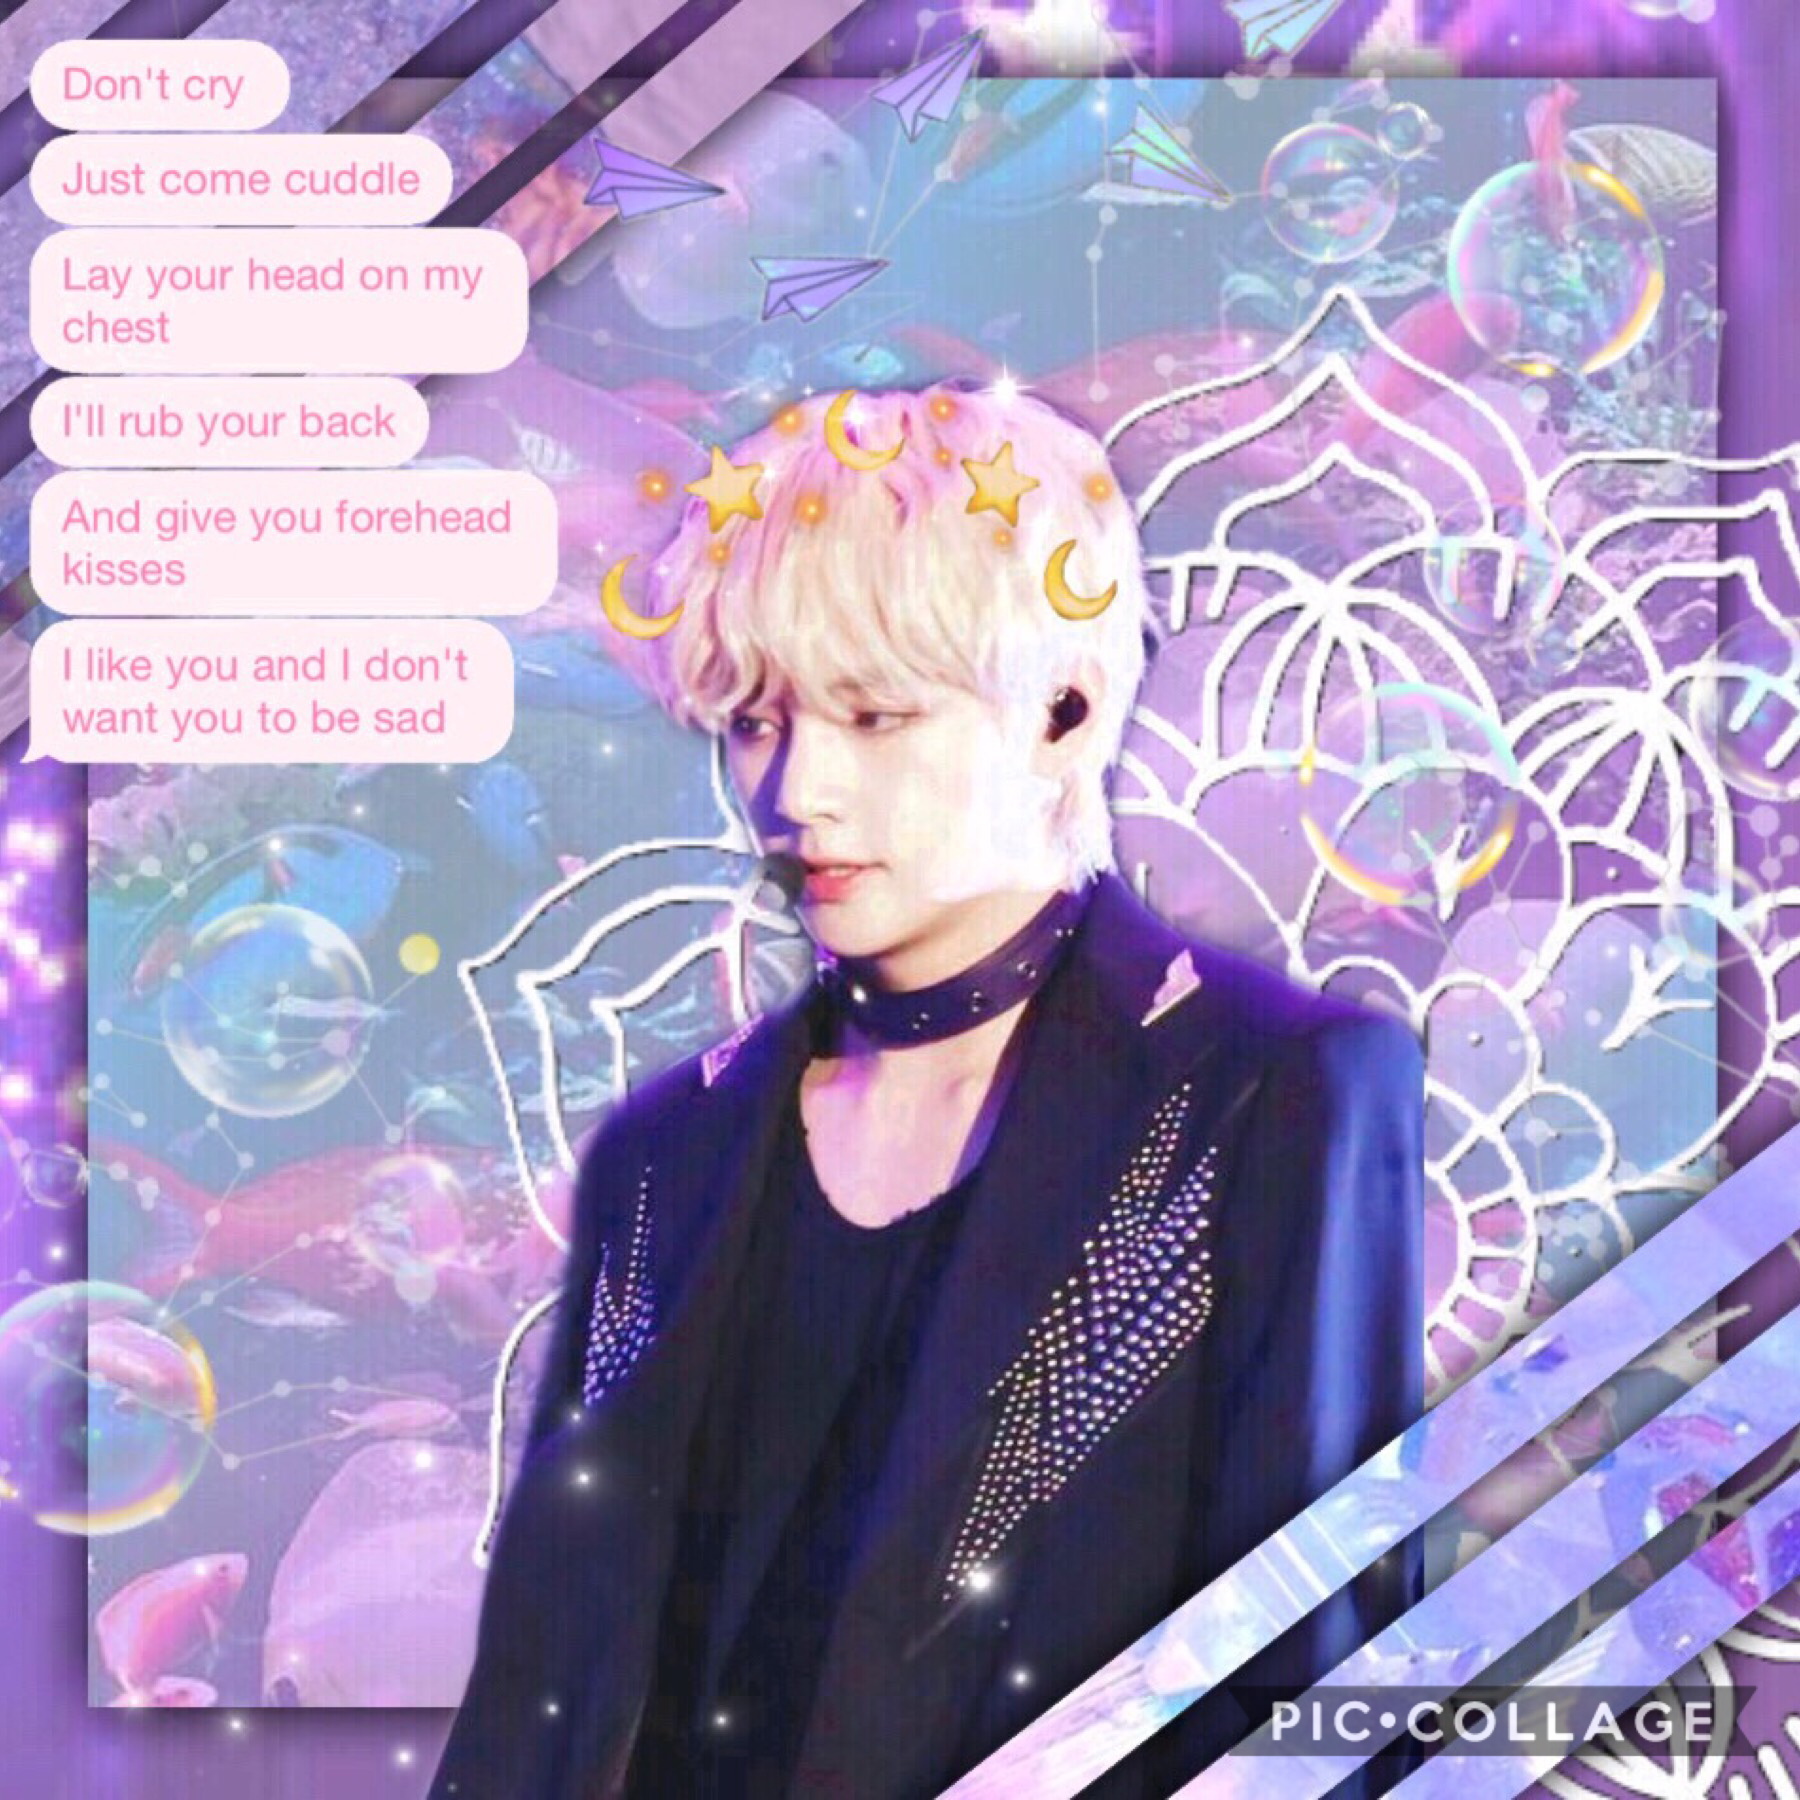 Tap 💜
Okay some of u might think the texts ruin the edit BUT THE WORDS ARE SO CUTE 😭😭anyways this is my trashy sleepy edit enjoy